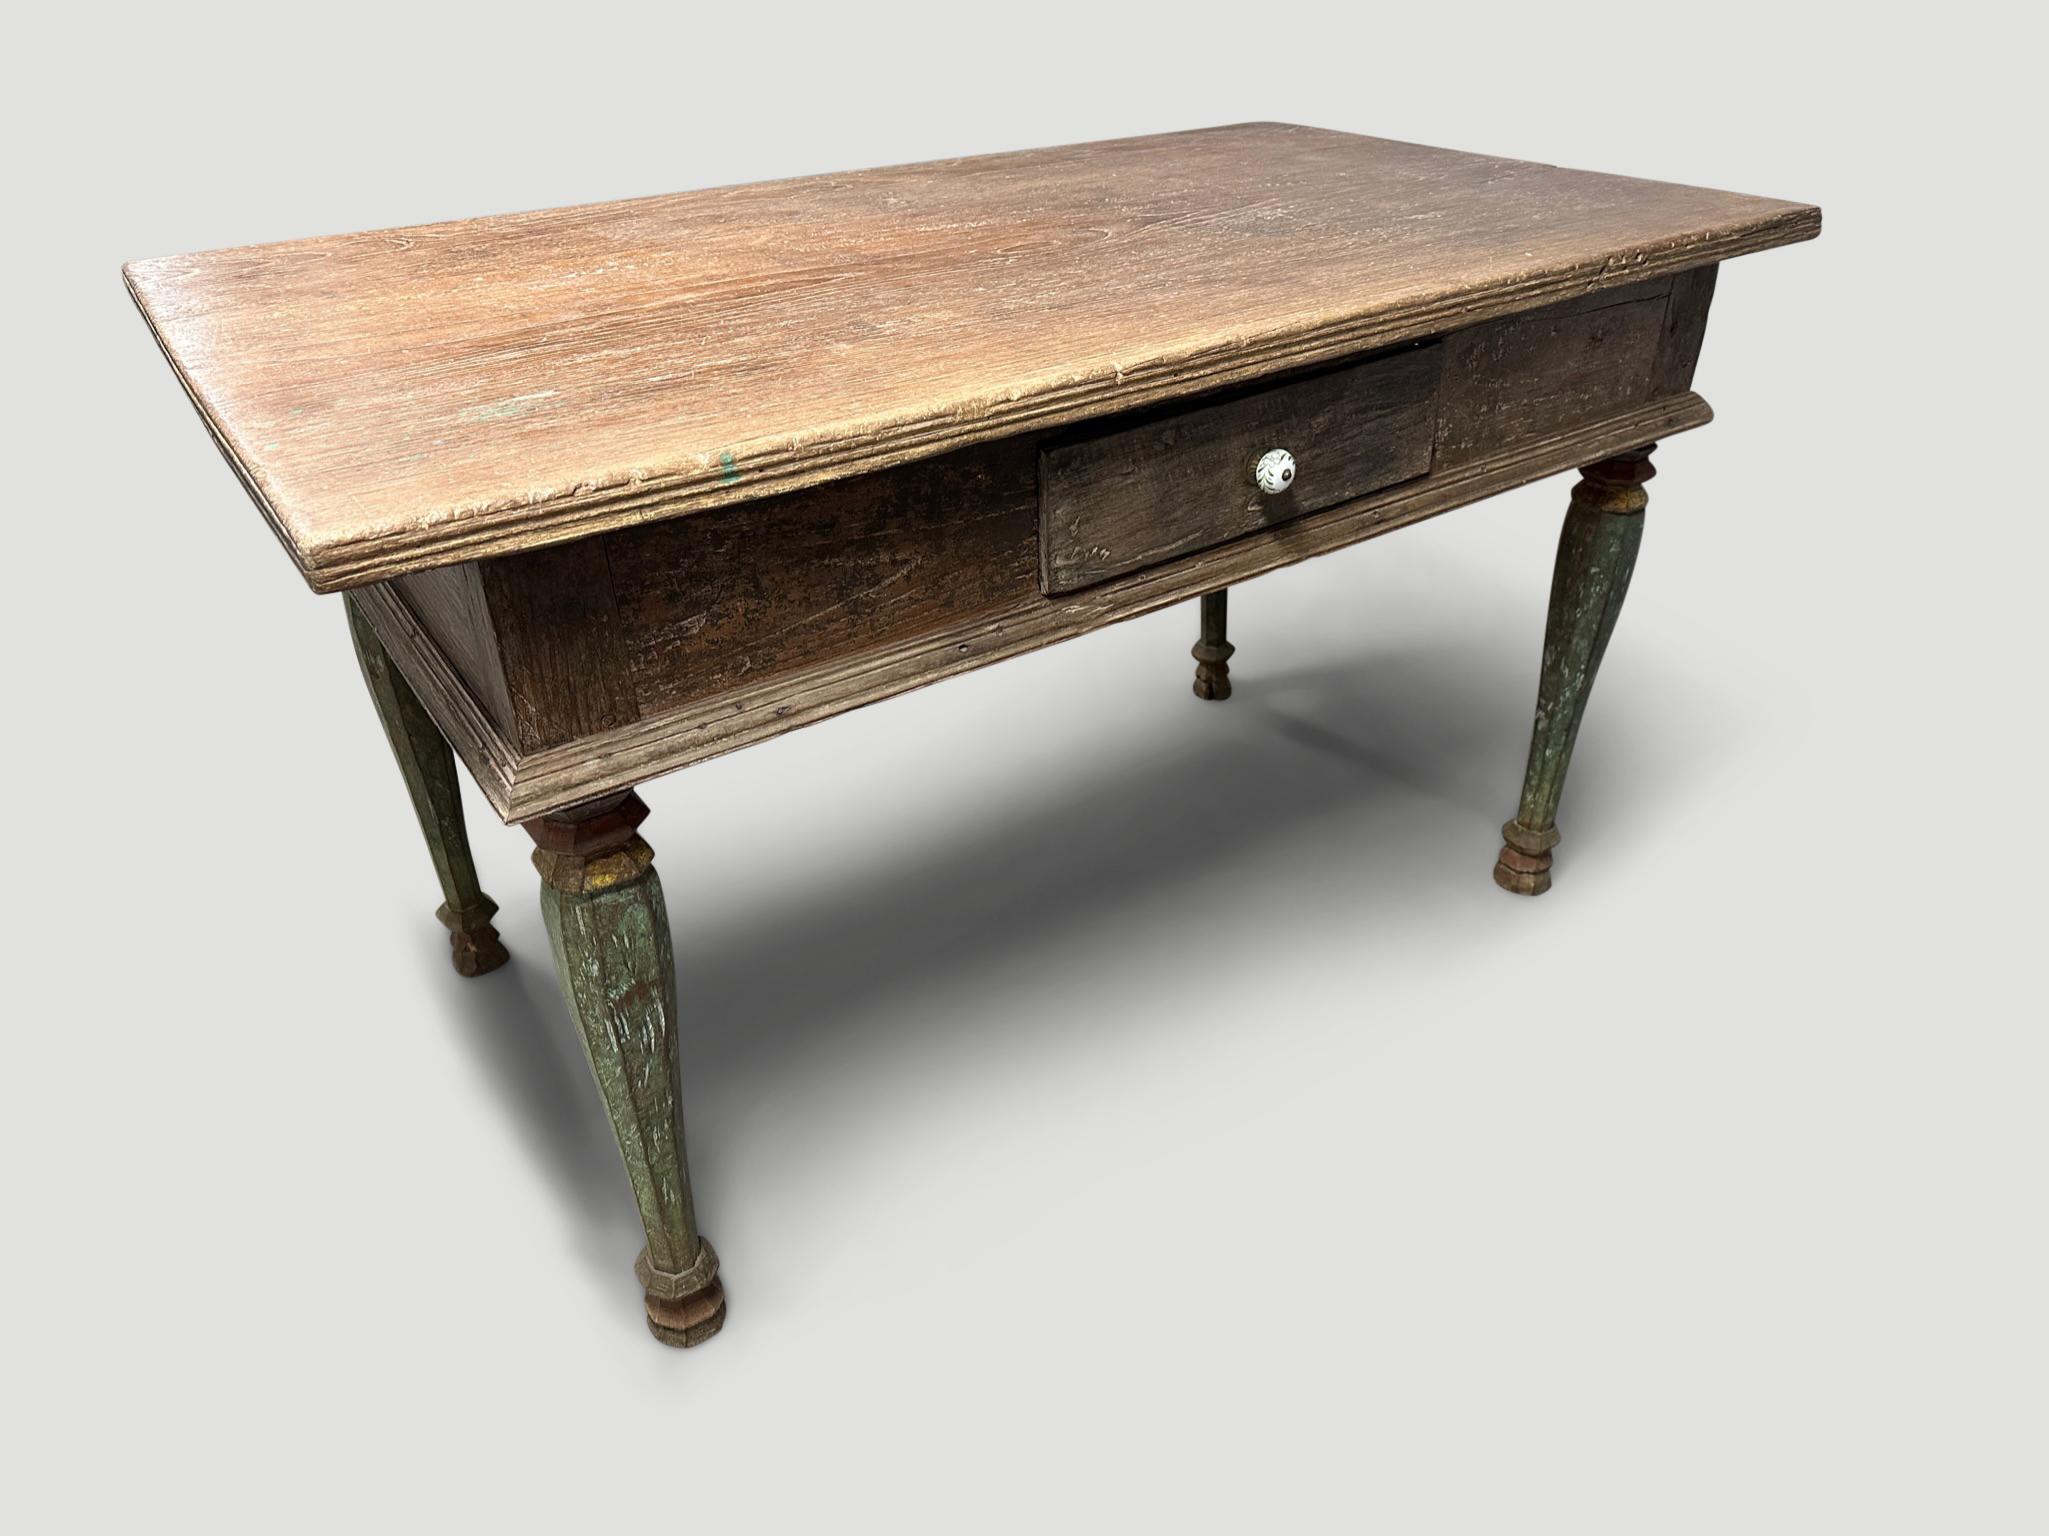 Early 20th Century Andrianna Shamaris Rare Antique Teak Wood Console or Desk For Sale